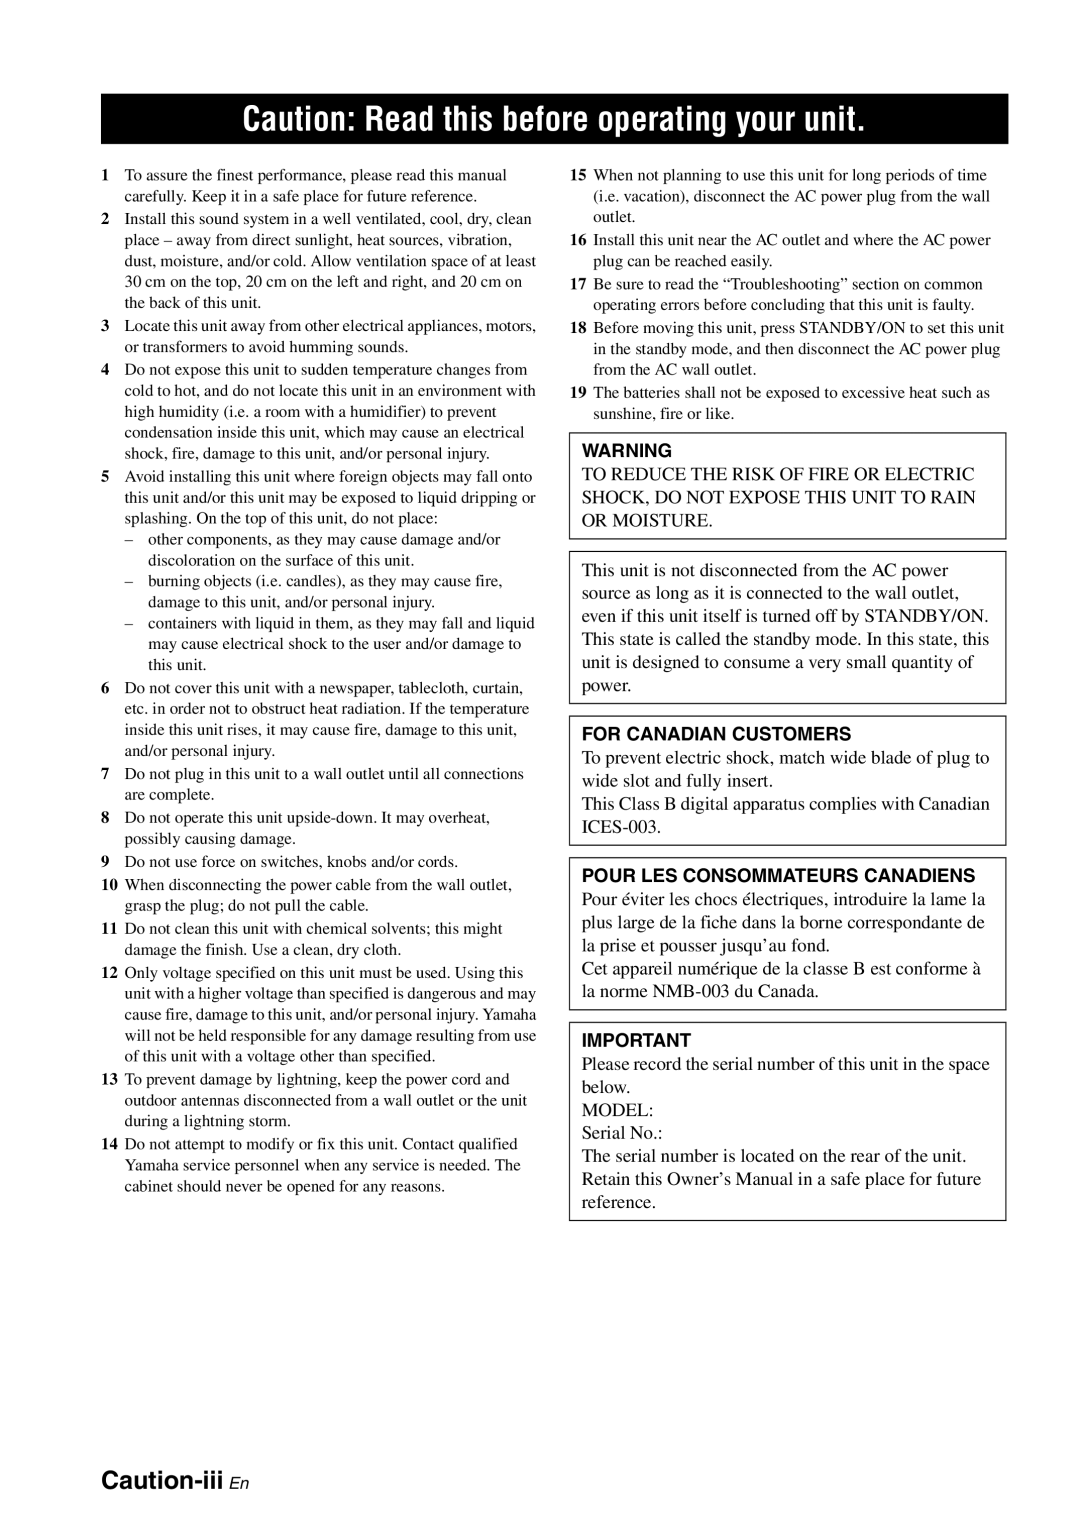 Yamaha HTR-6080 owner manual Caution: Read this before operating your unit, Caution-iii En 